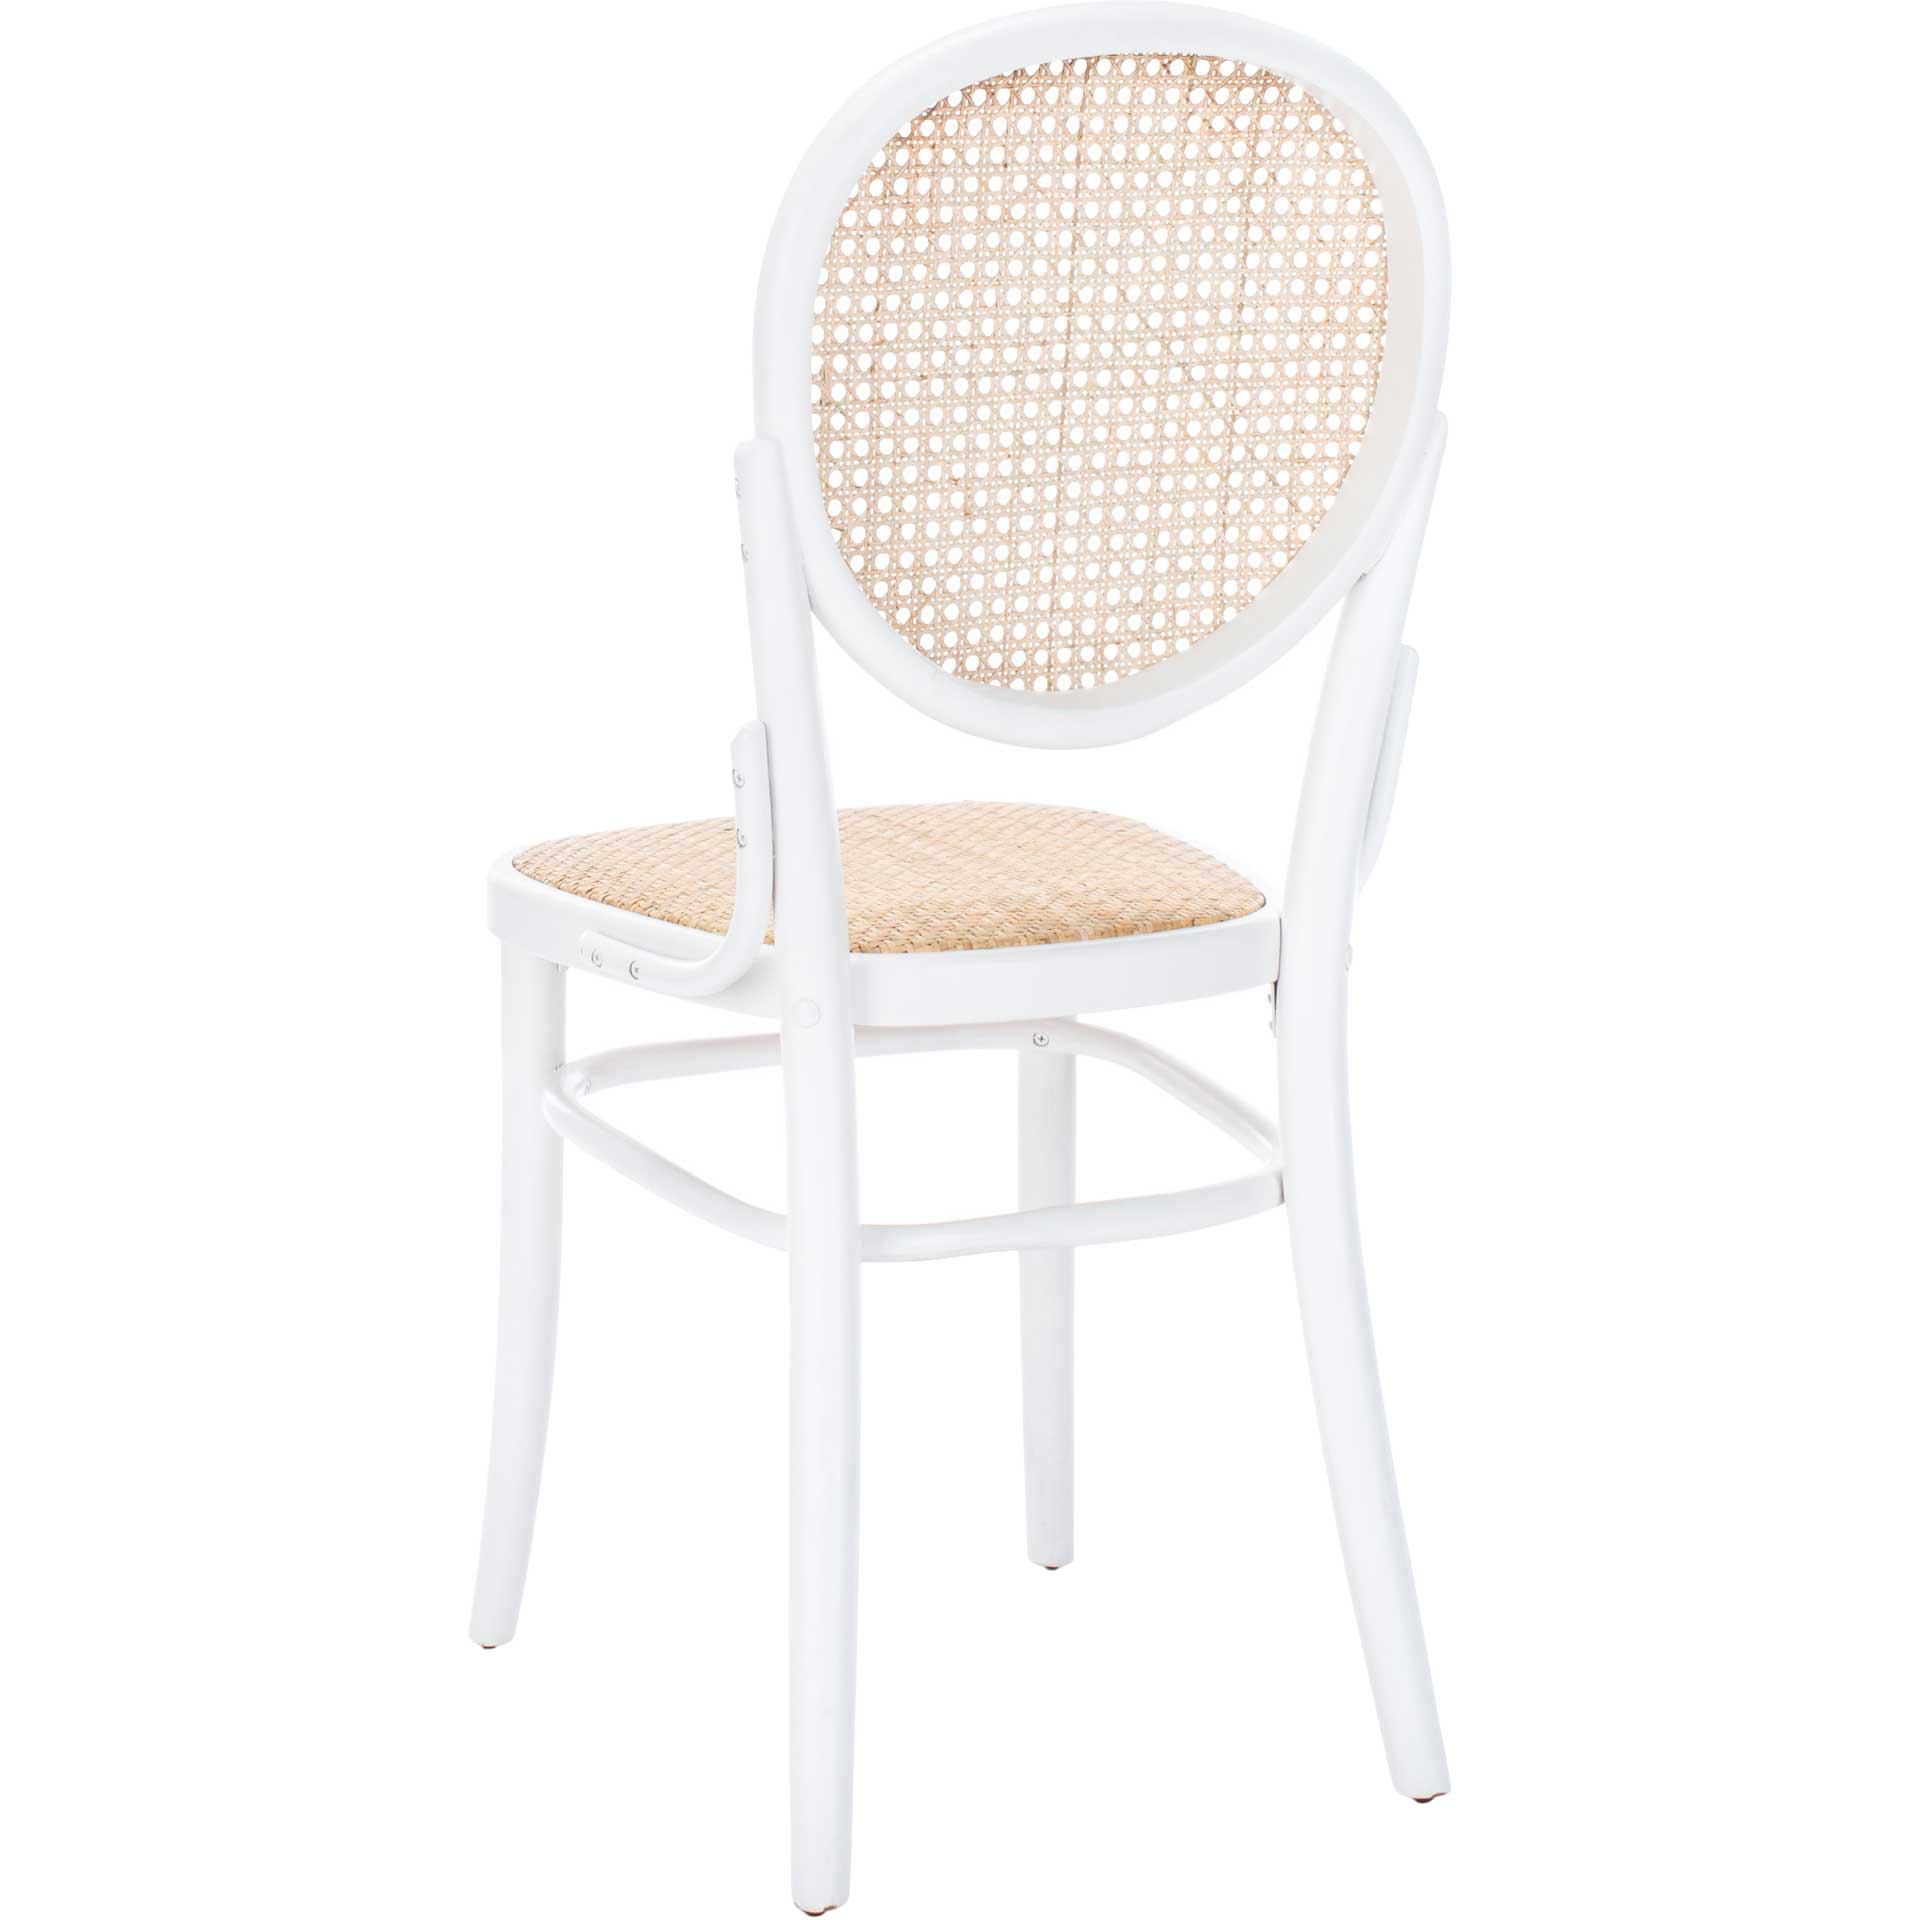 Sonia Cane Dining Chair White/Natural (Set of 2)